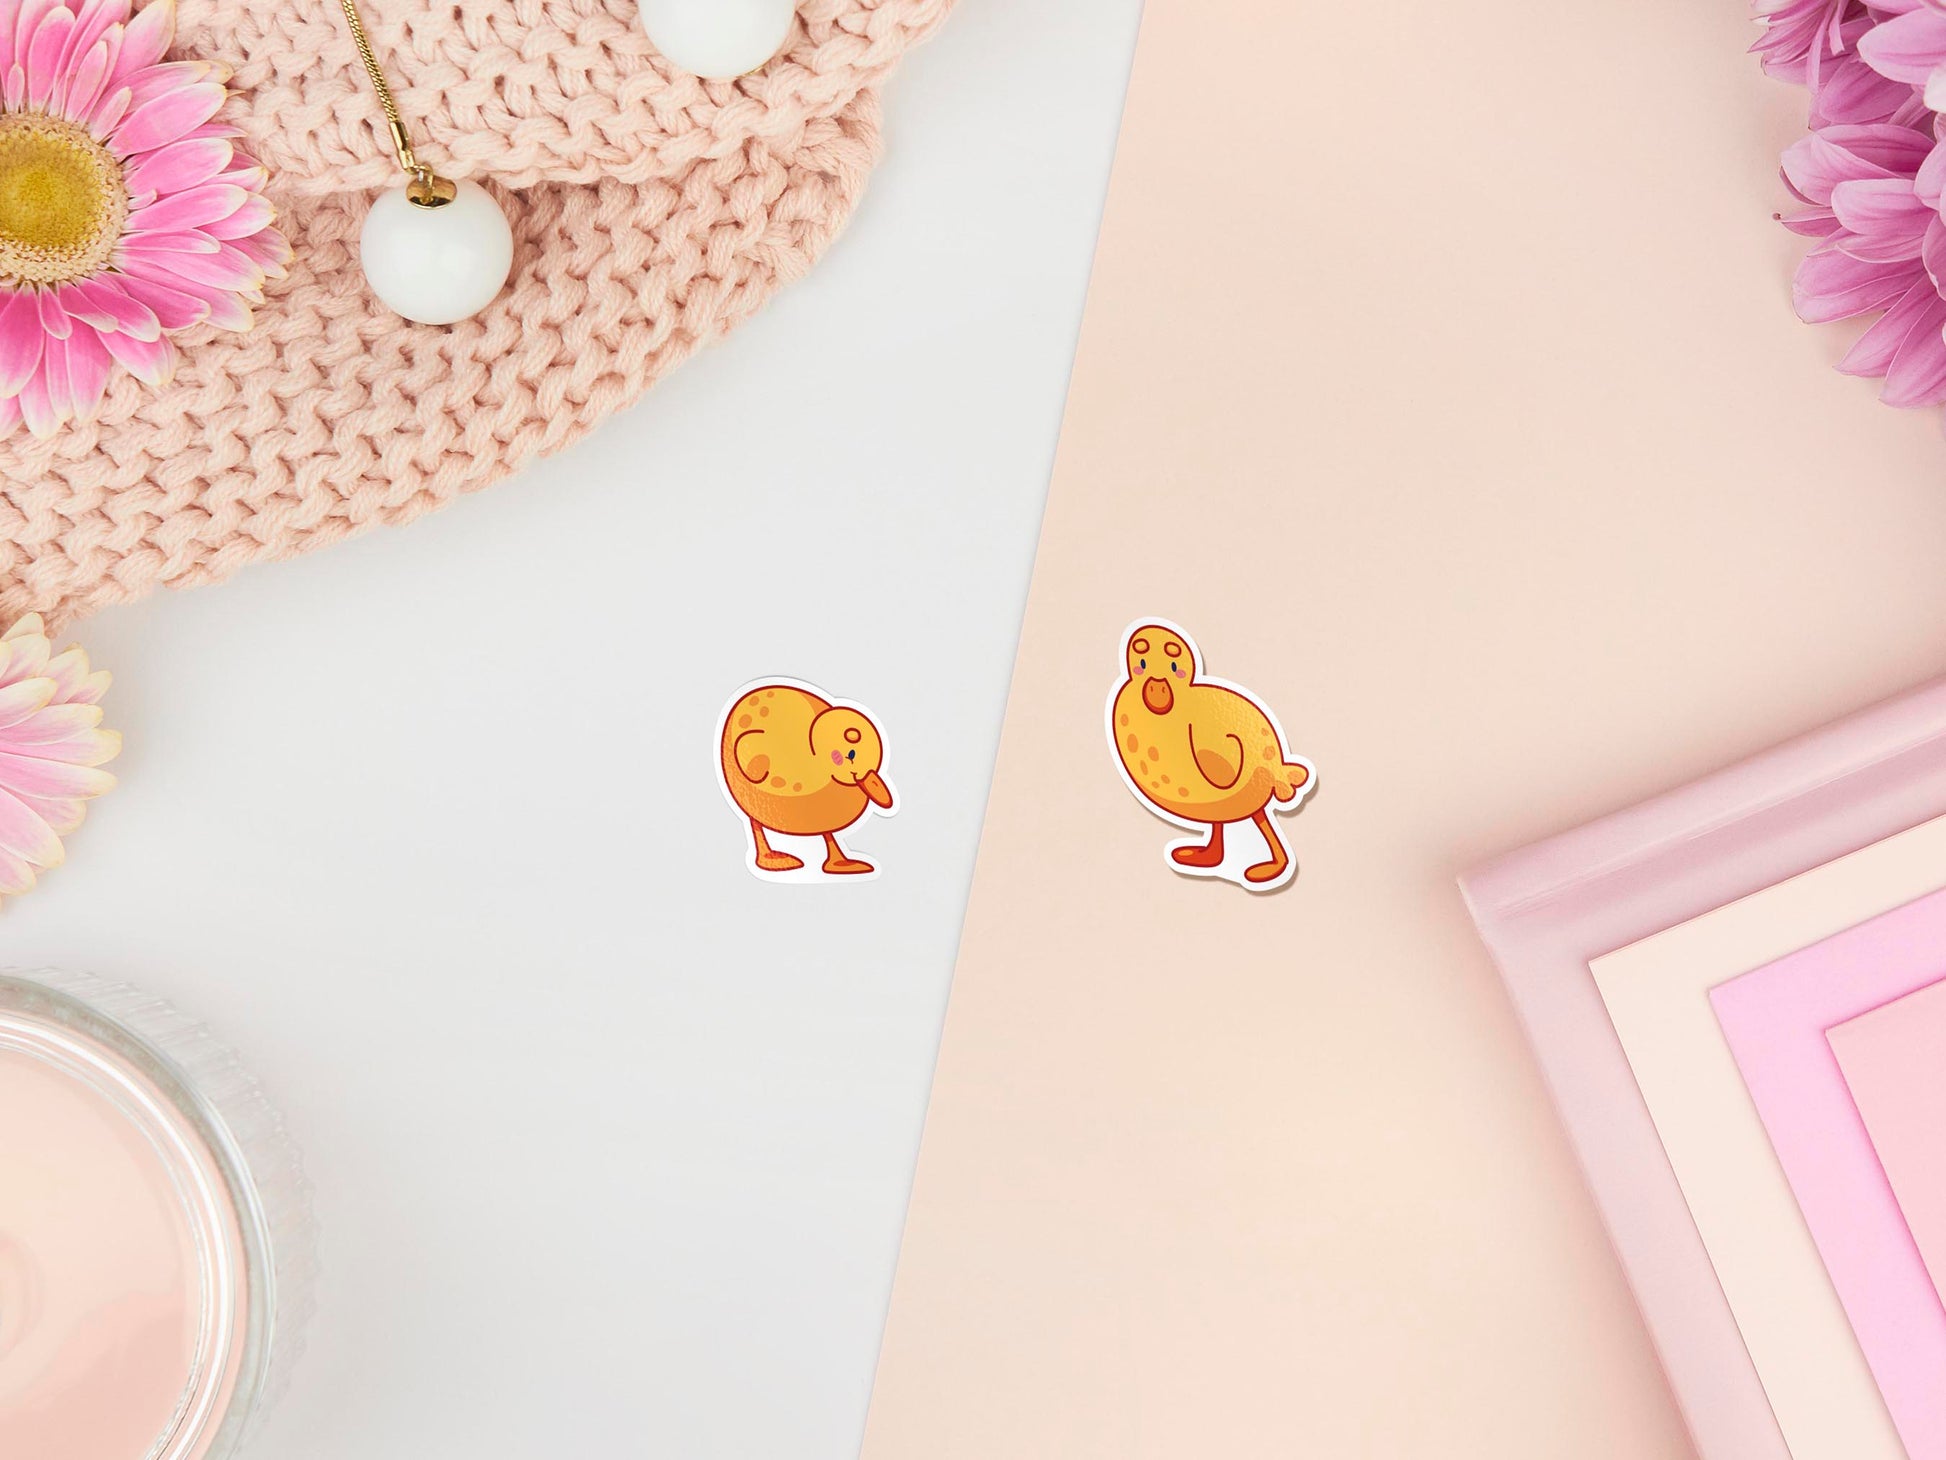 Two stickers of digitally illustrated cartoon of small yellow ducklings